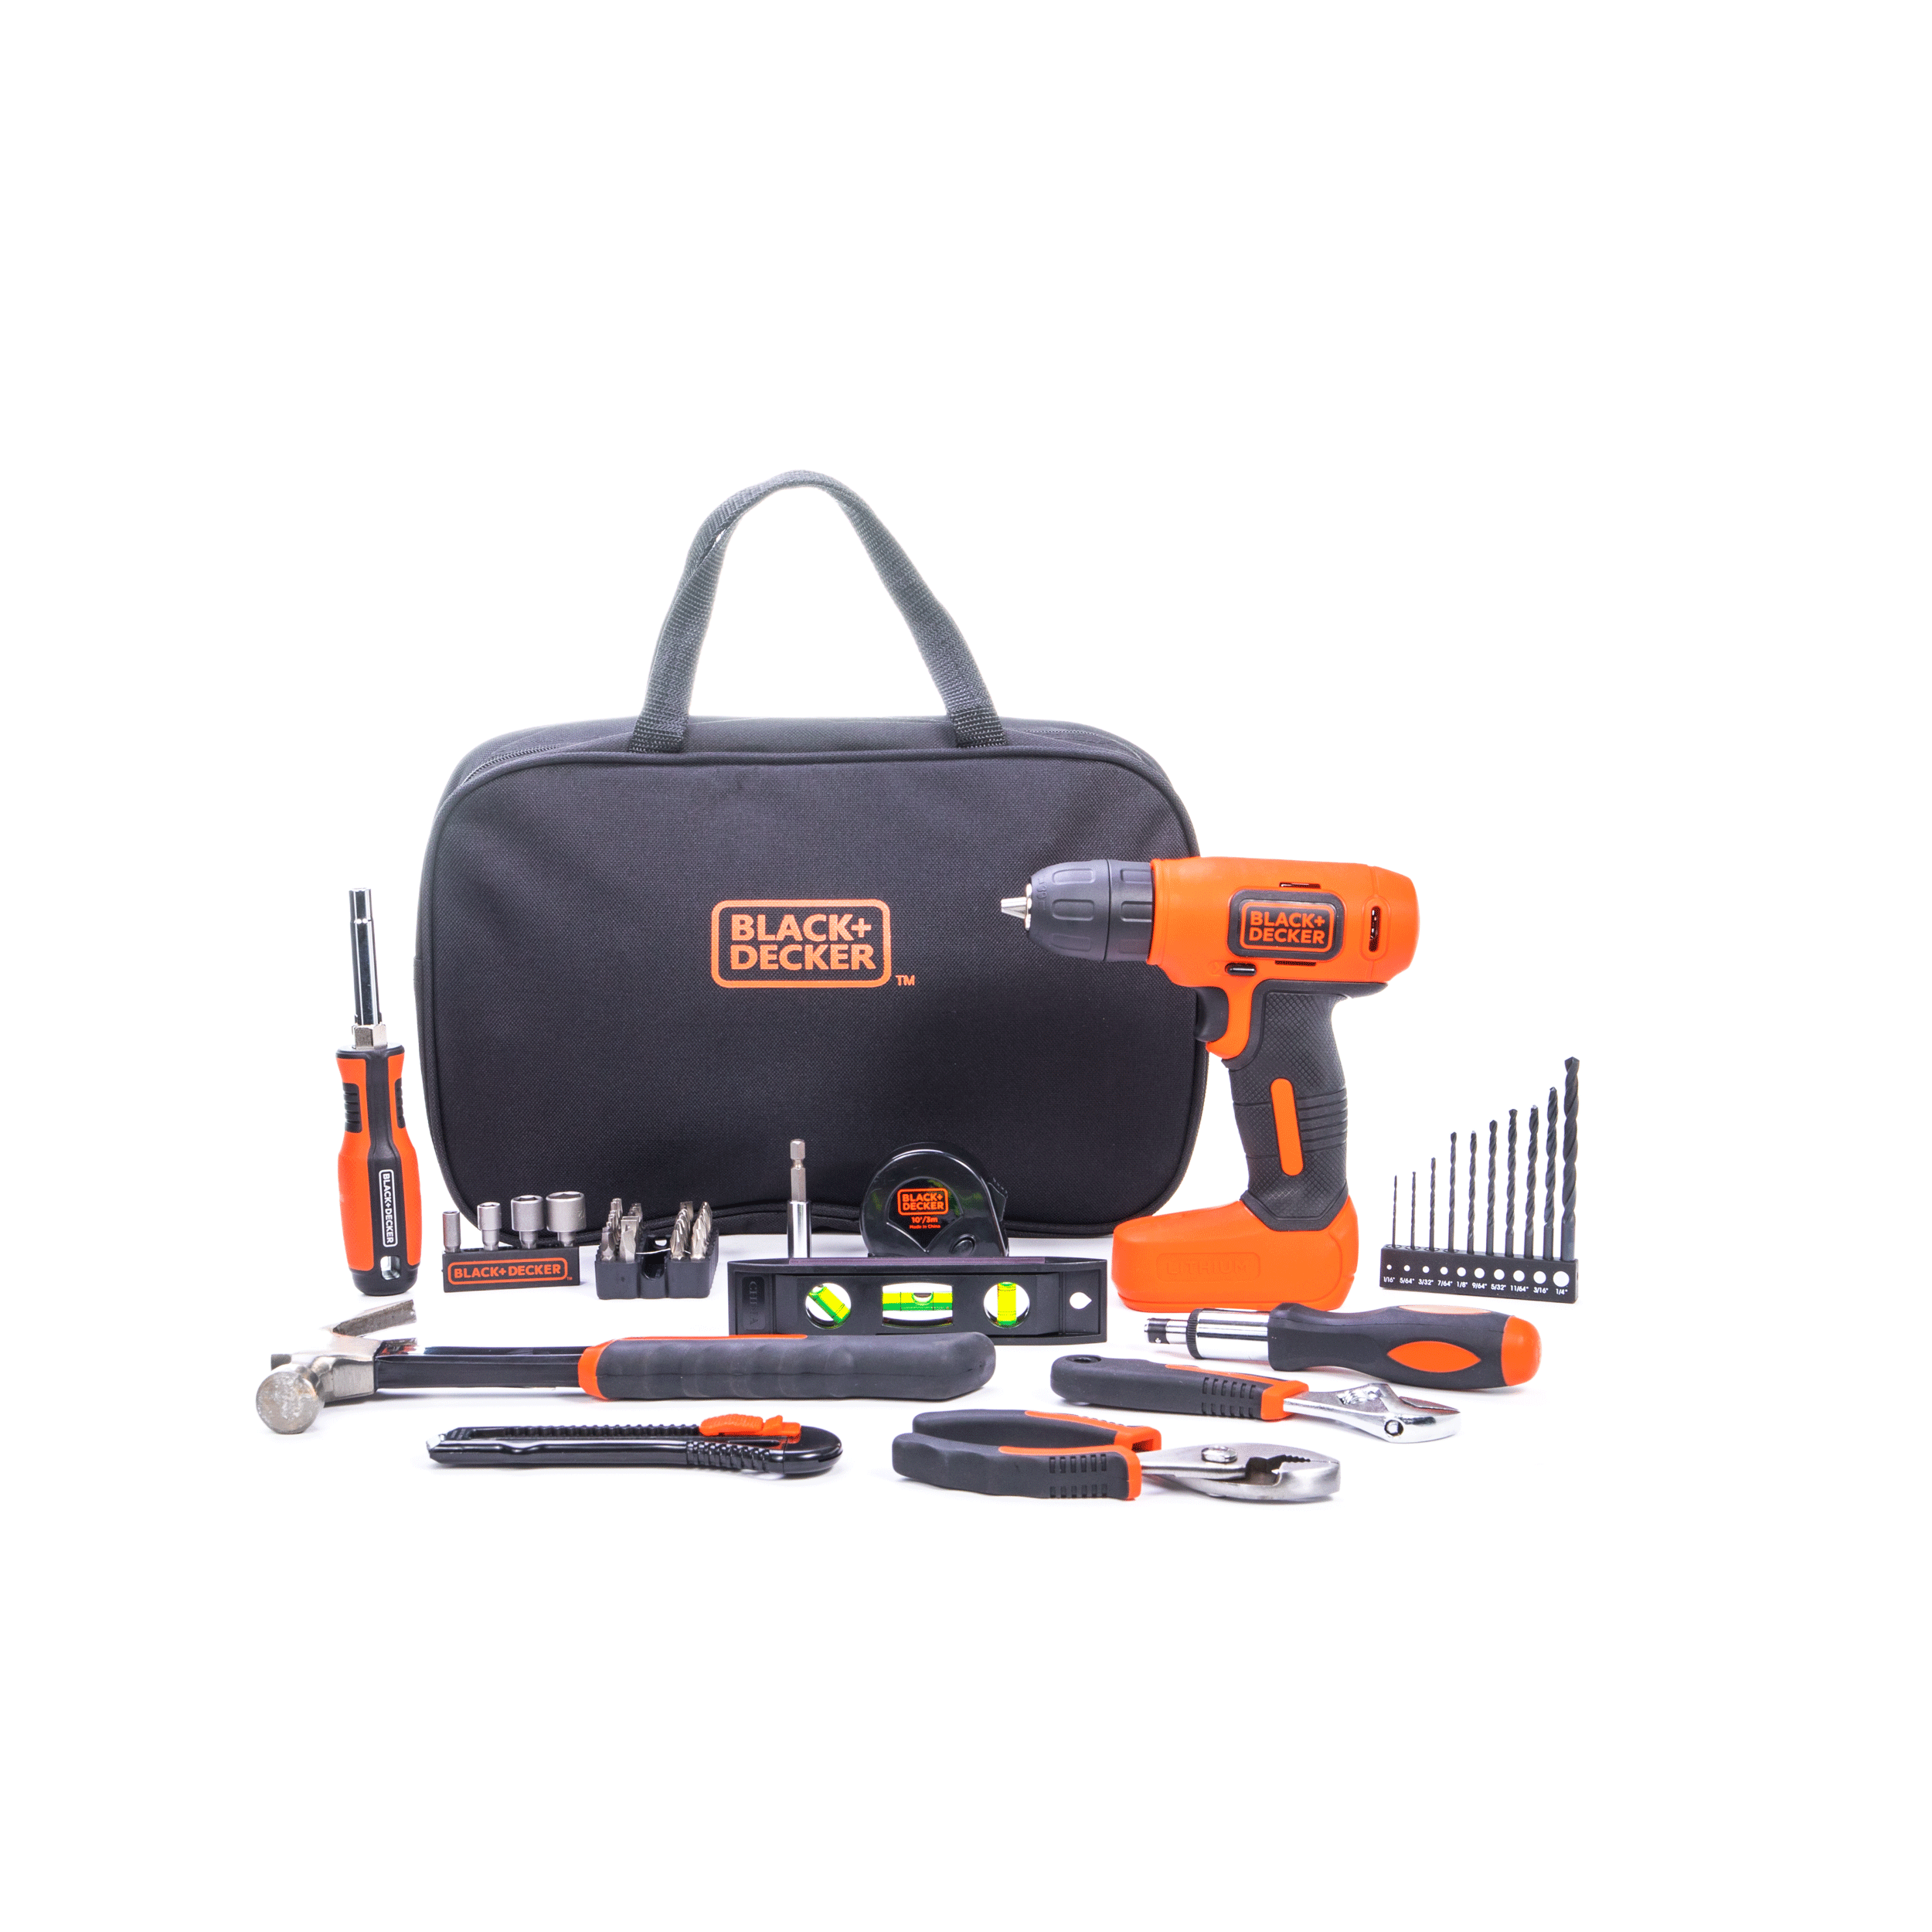 Black+decker 8V Ready to Decorate Project Kit